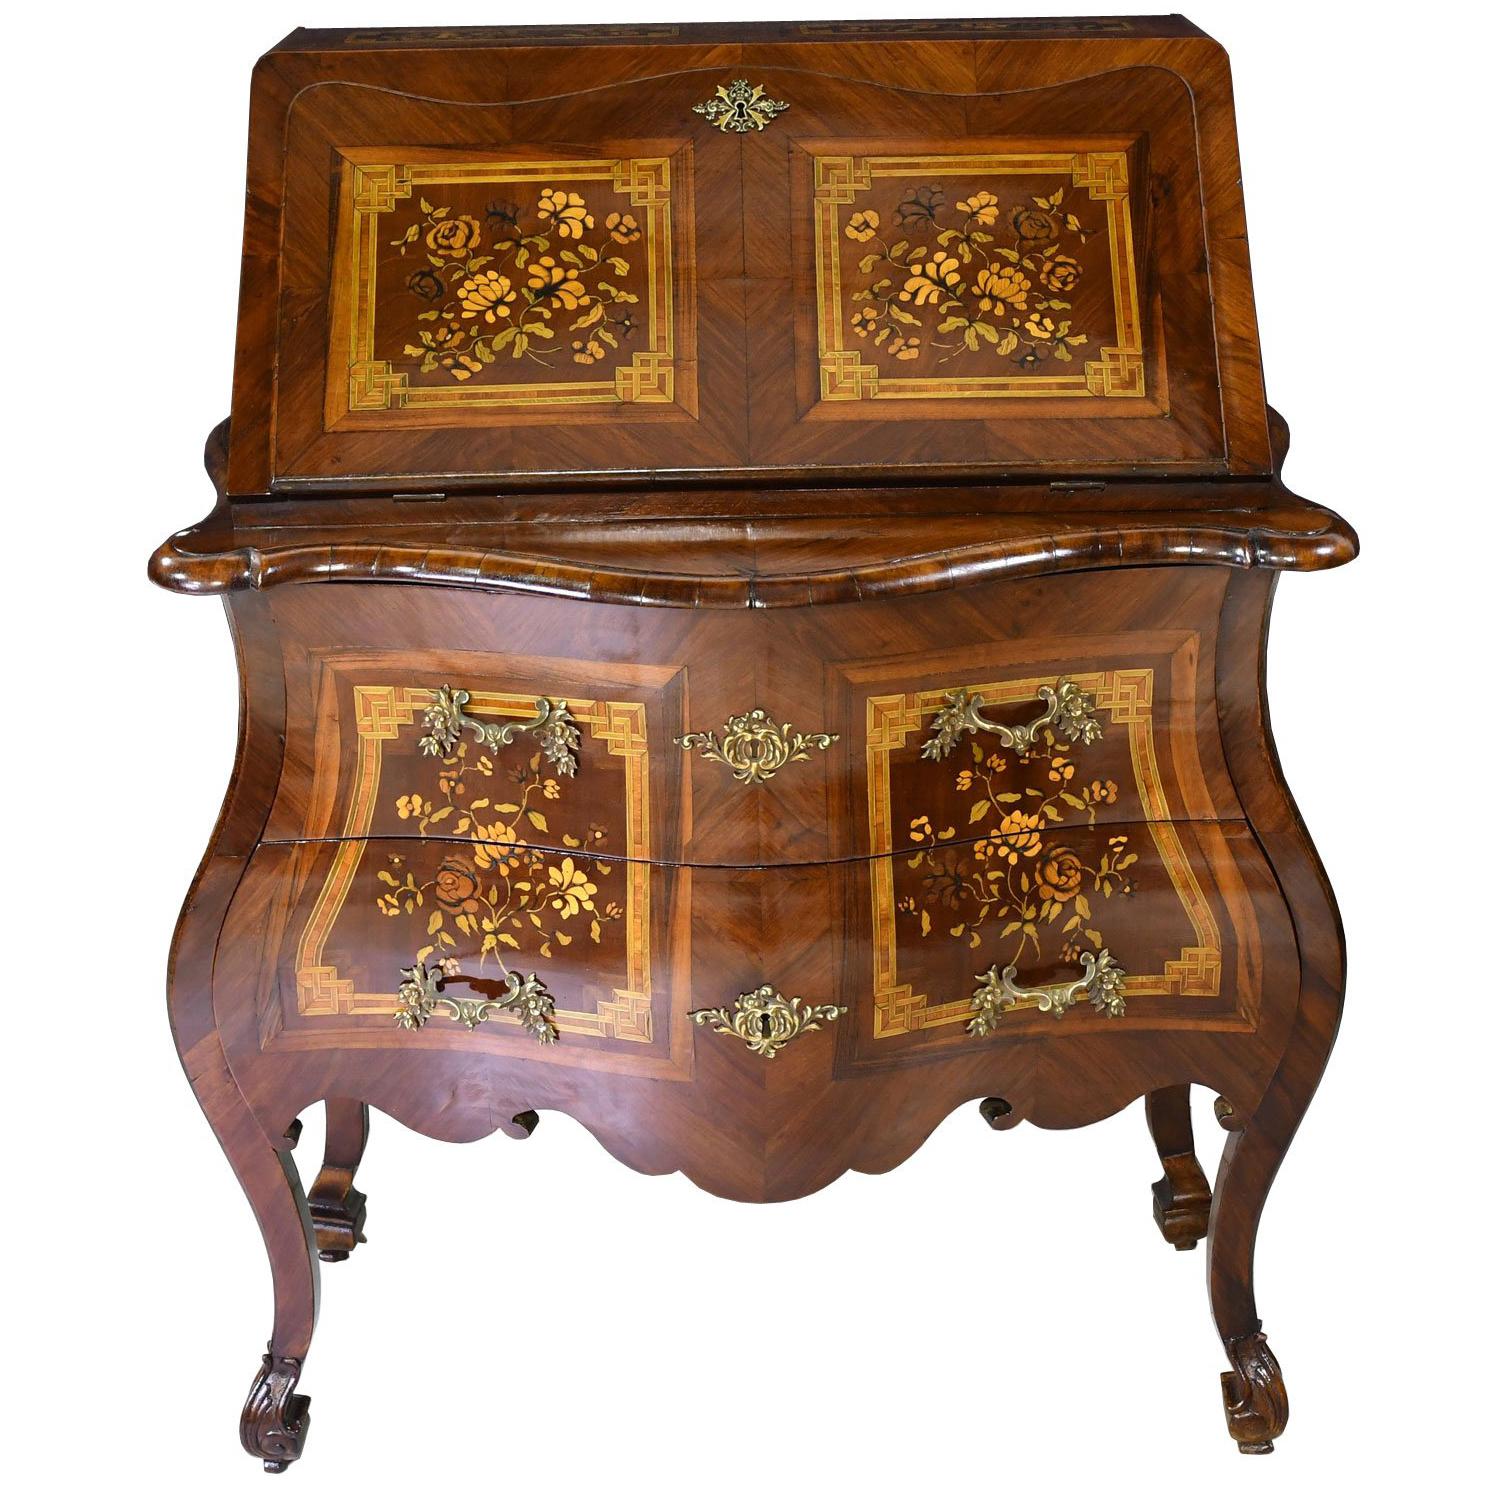 An exquisite 19th century Rococo secretary in mahogany with bombe front & sides, with floral & foliate inlays in tulipwood, kingwood & satinwood on the top, front panels of the drawer, slant-top, and sides. Marquetry inlays on the lower sides of the